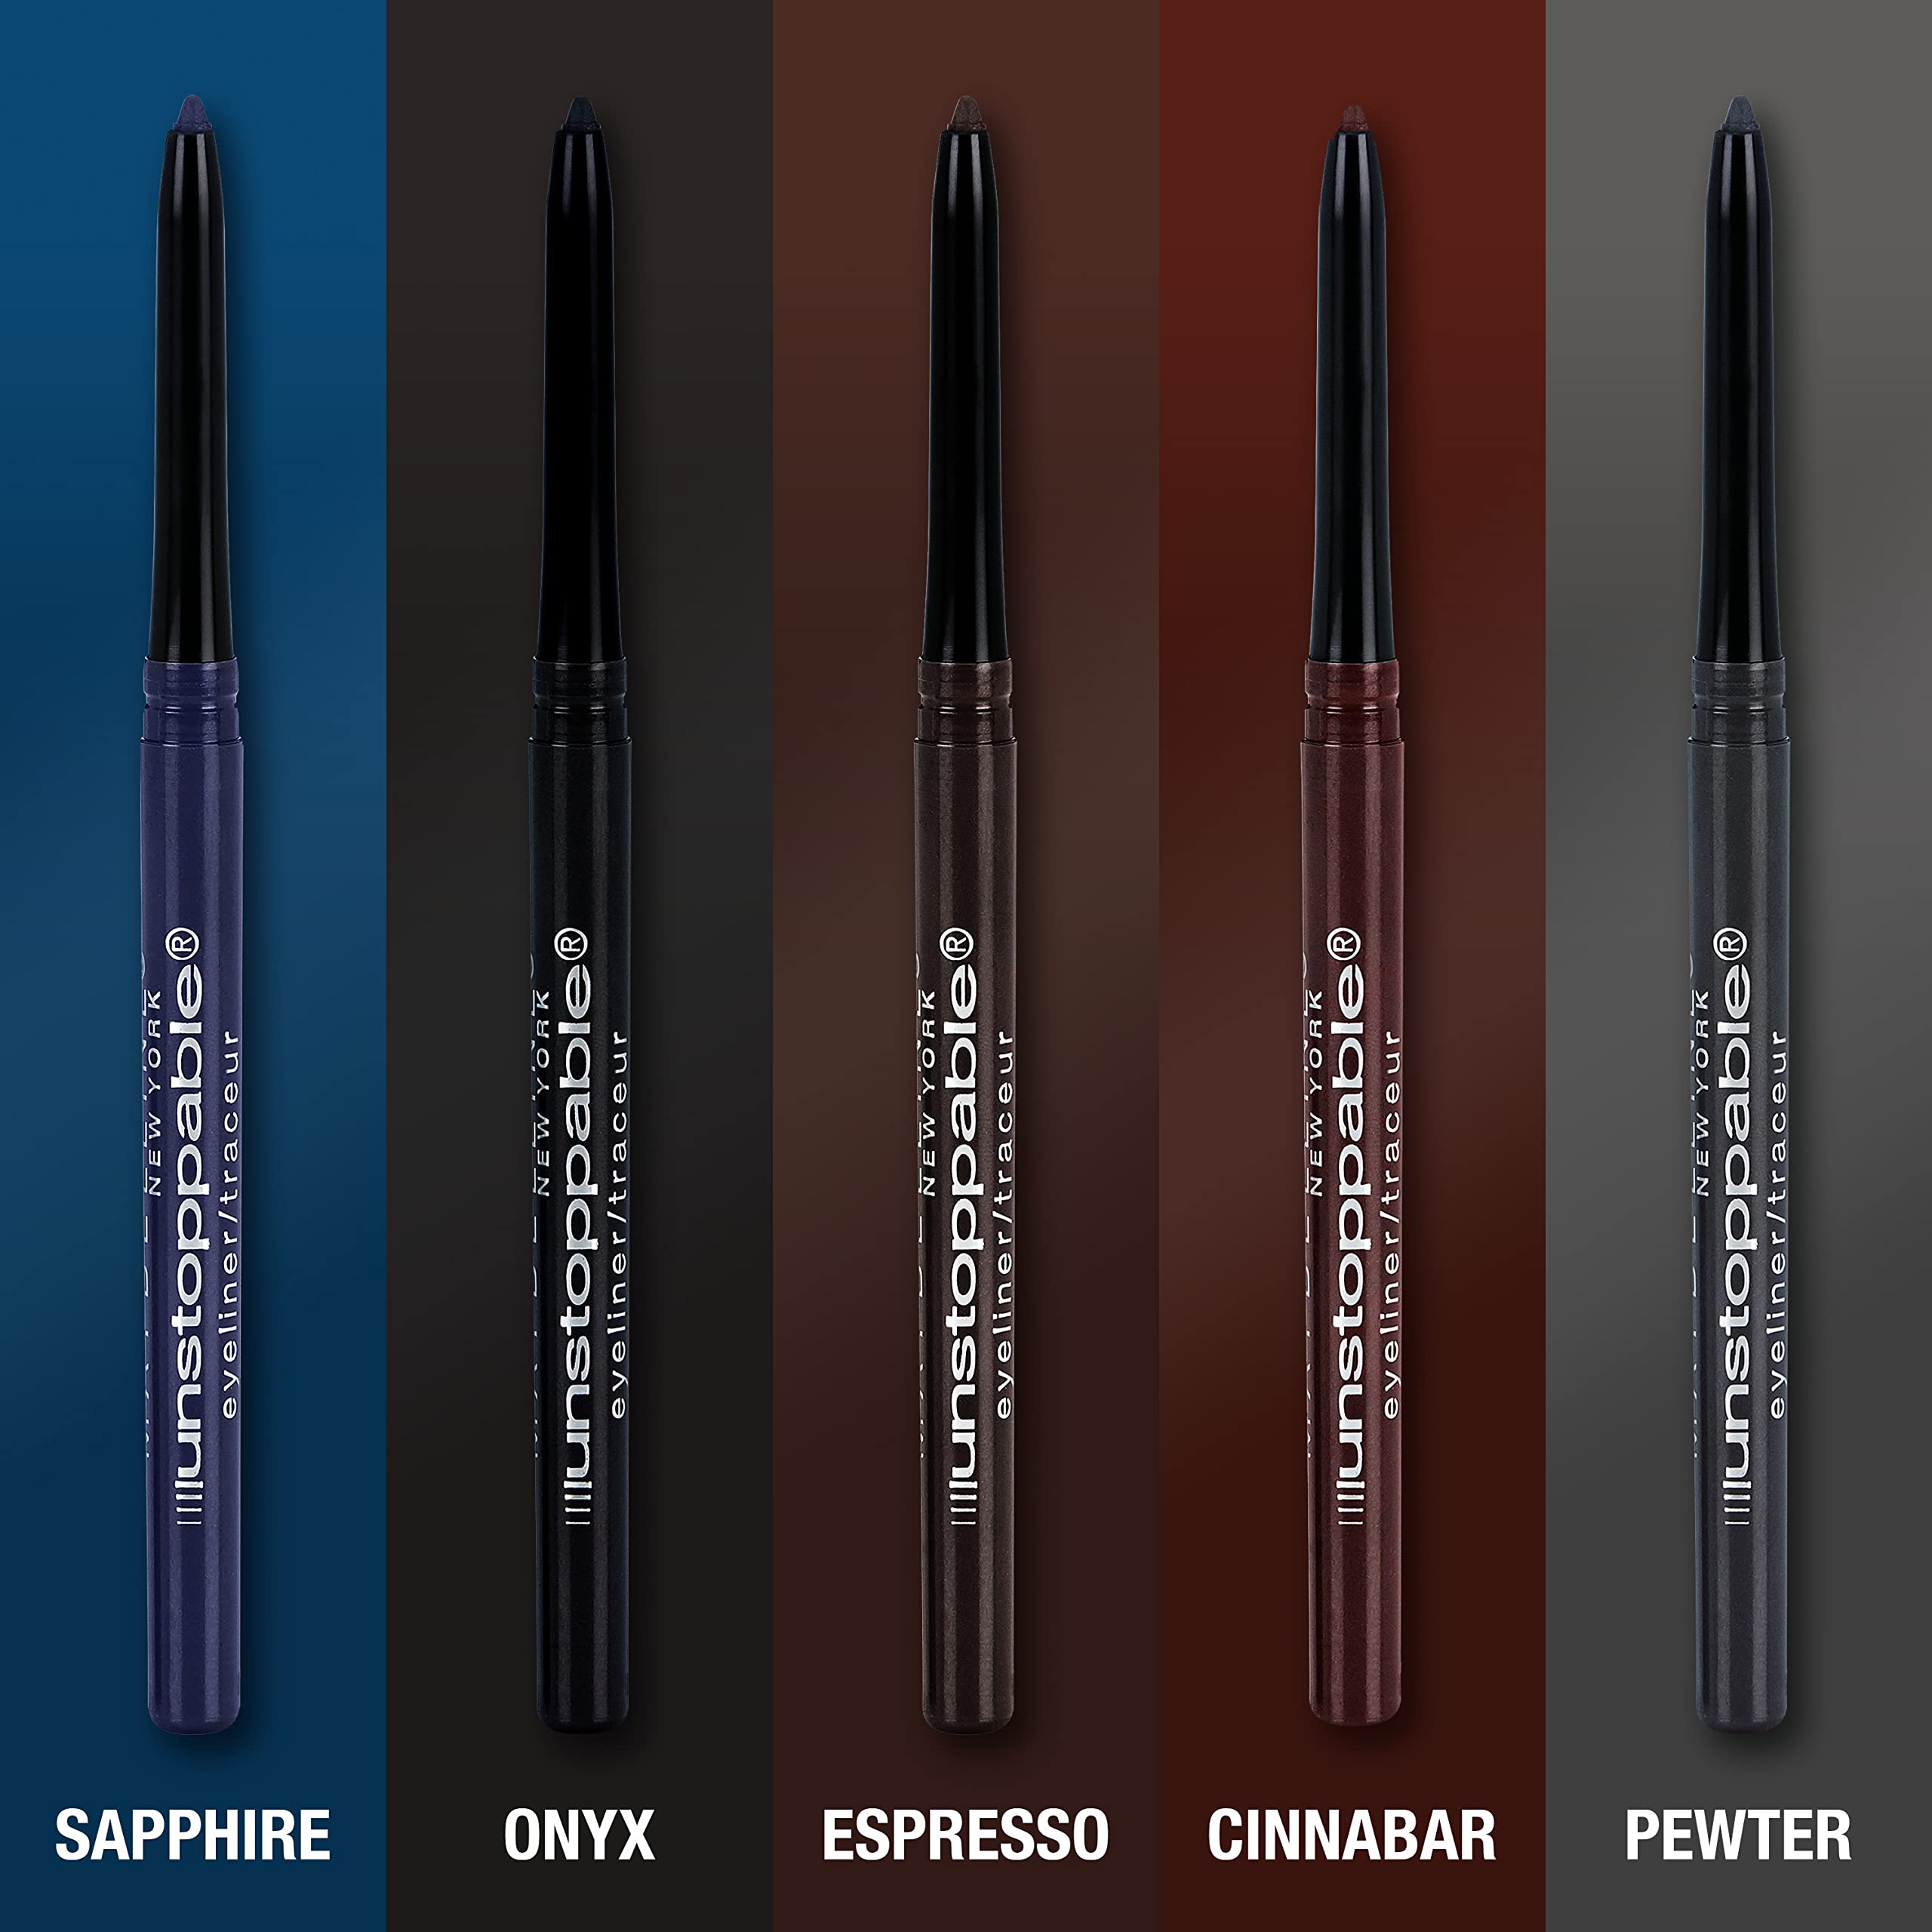 MAYBELLINE Unstoppable® Mechanical Eyeliner Pencil, Easy to Apply, Smooth Glide, Up to 24 Hour Wear Sapphire 0.02 oz